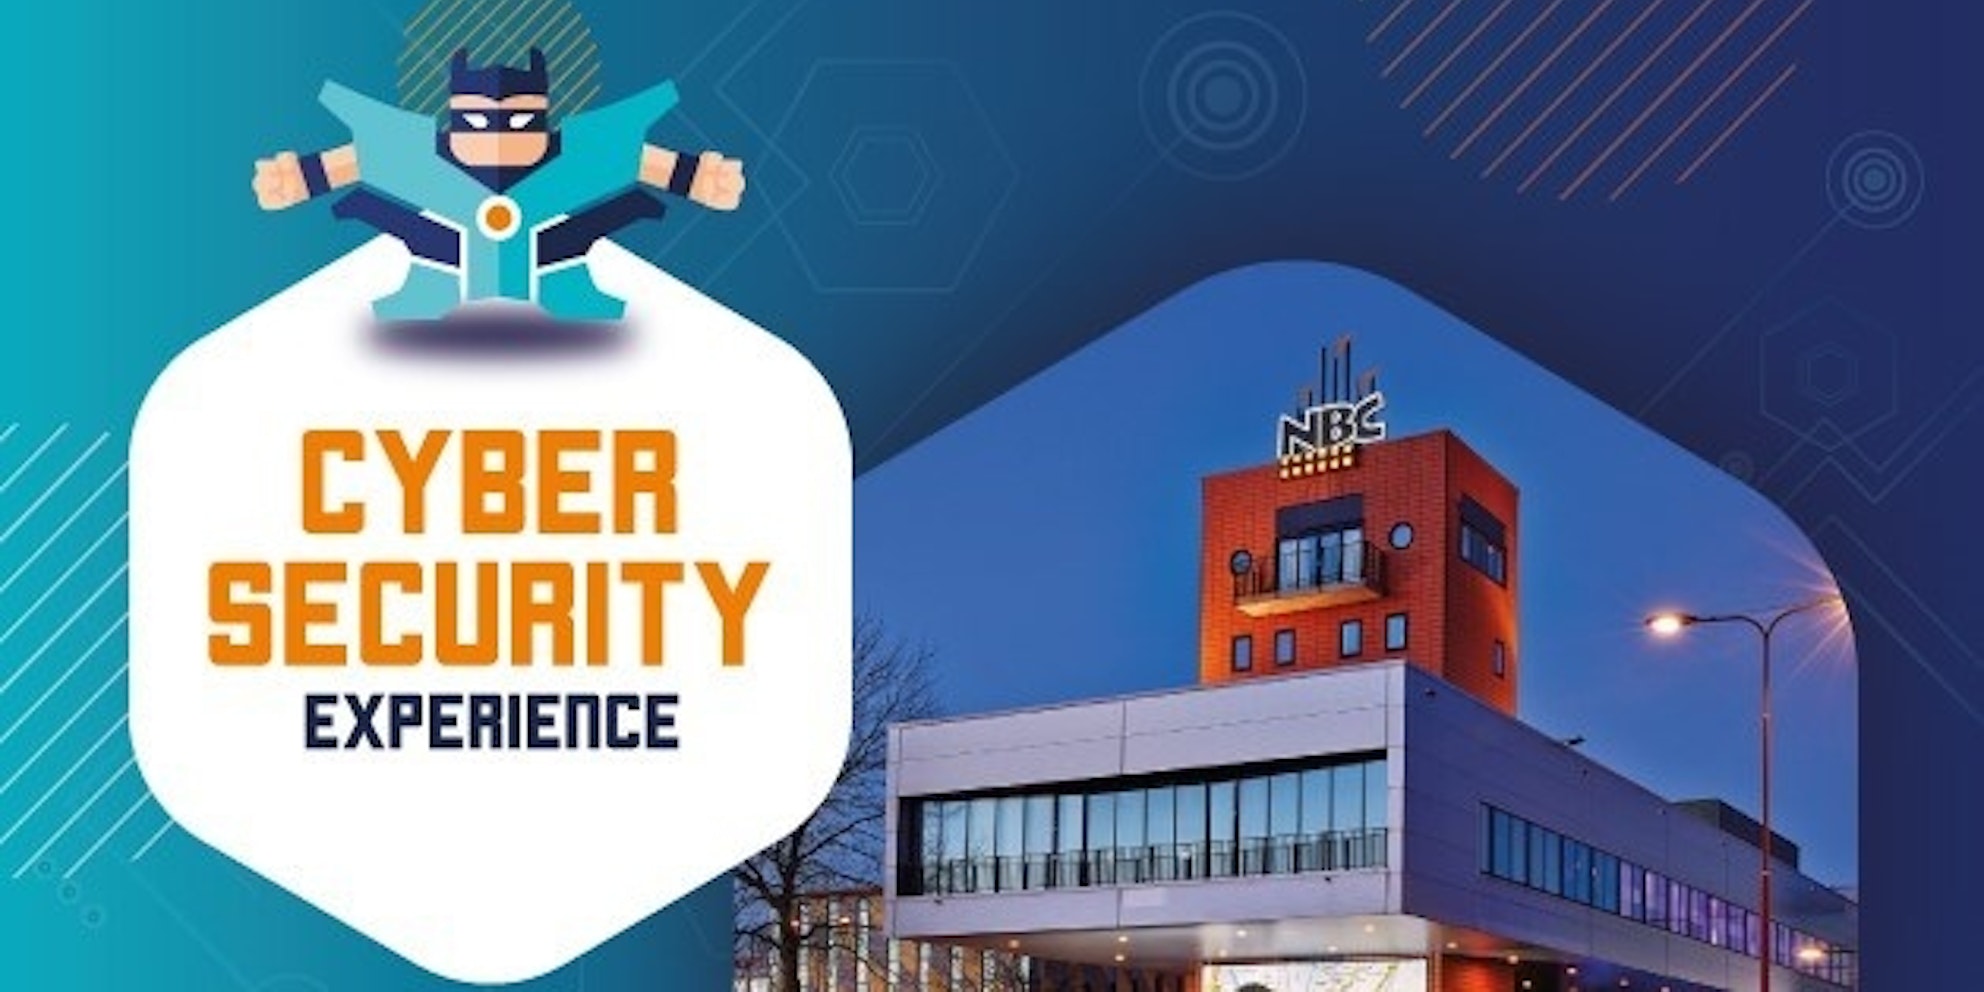 Cyber Security Experience 2019